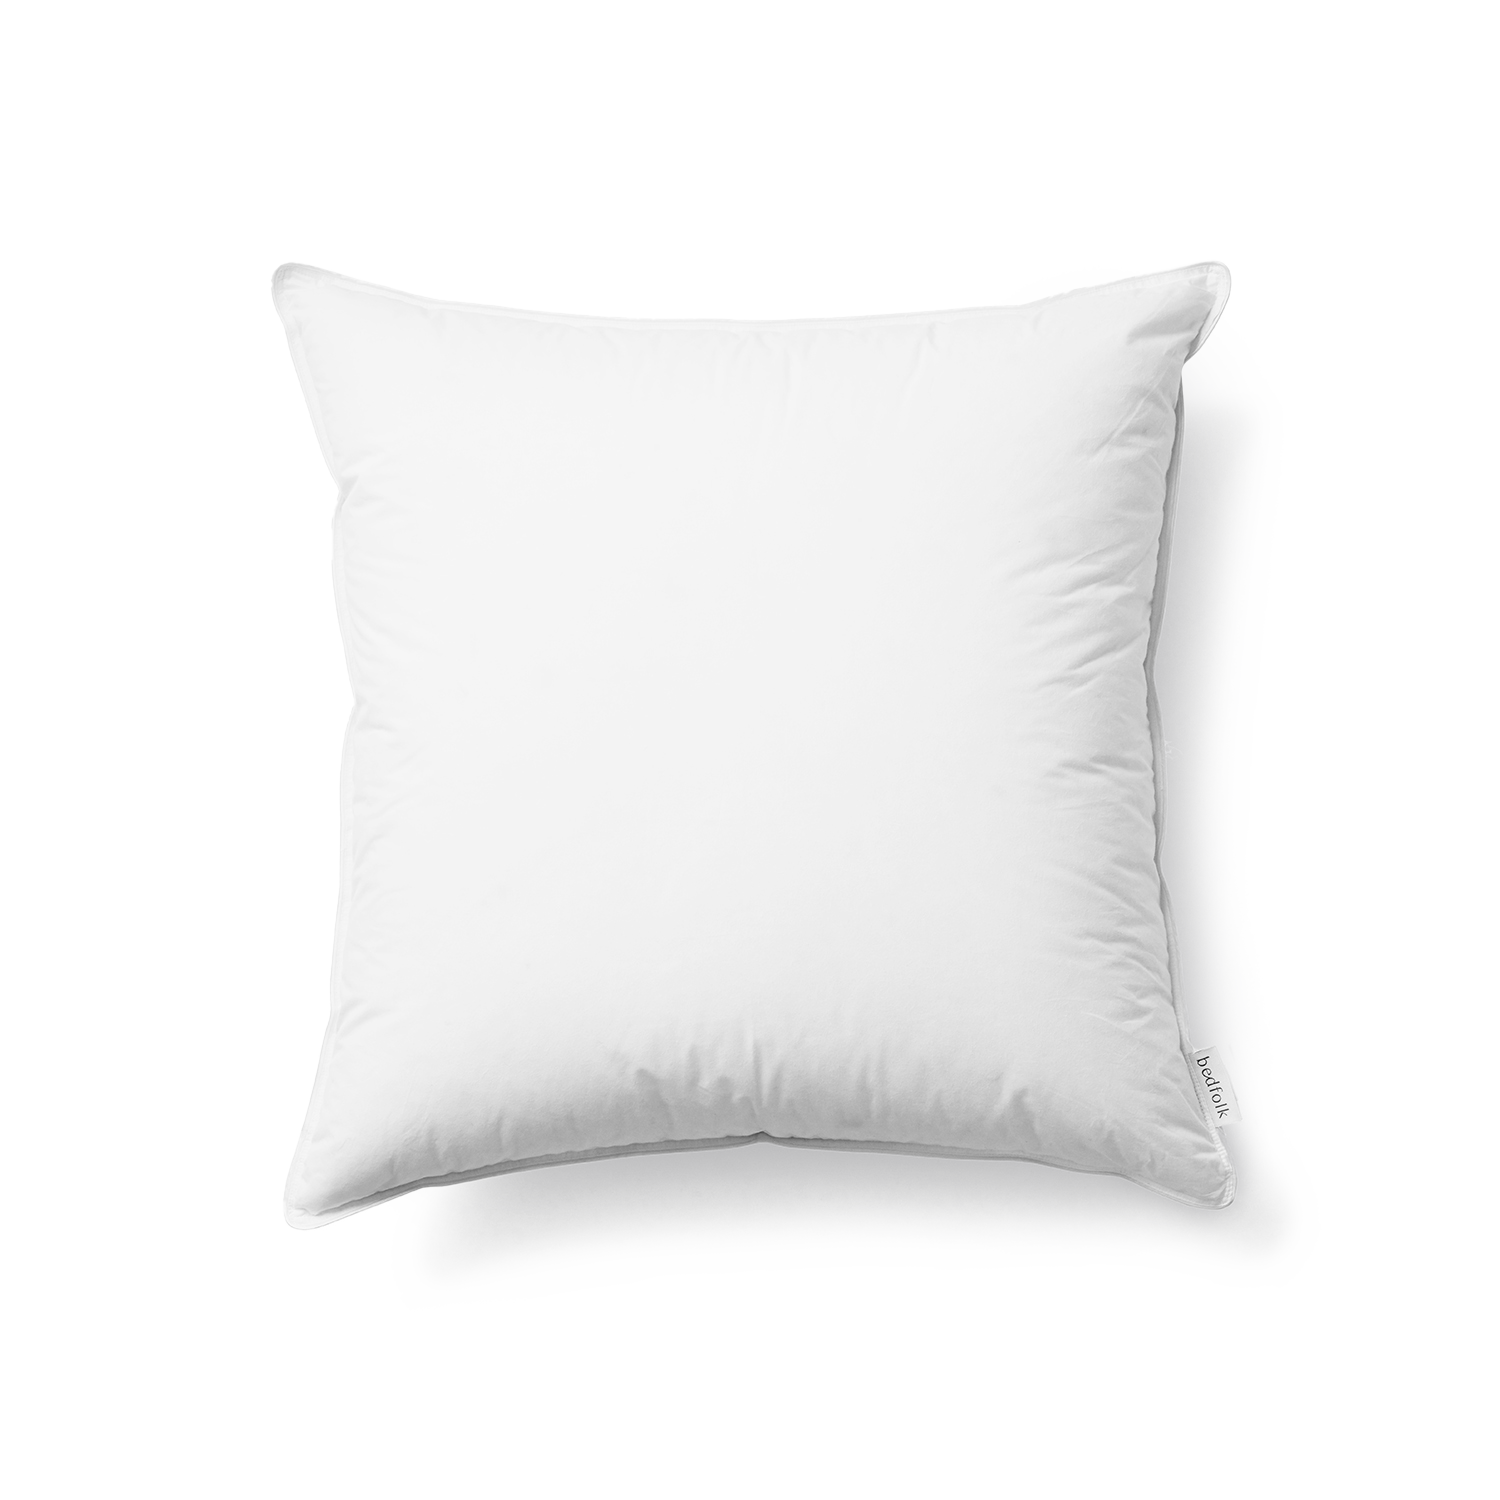 The Recycled Down Square Pillow